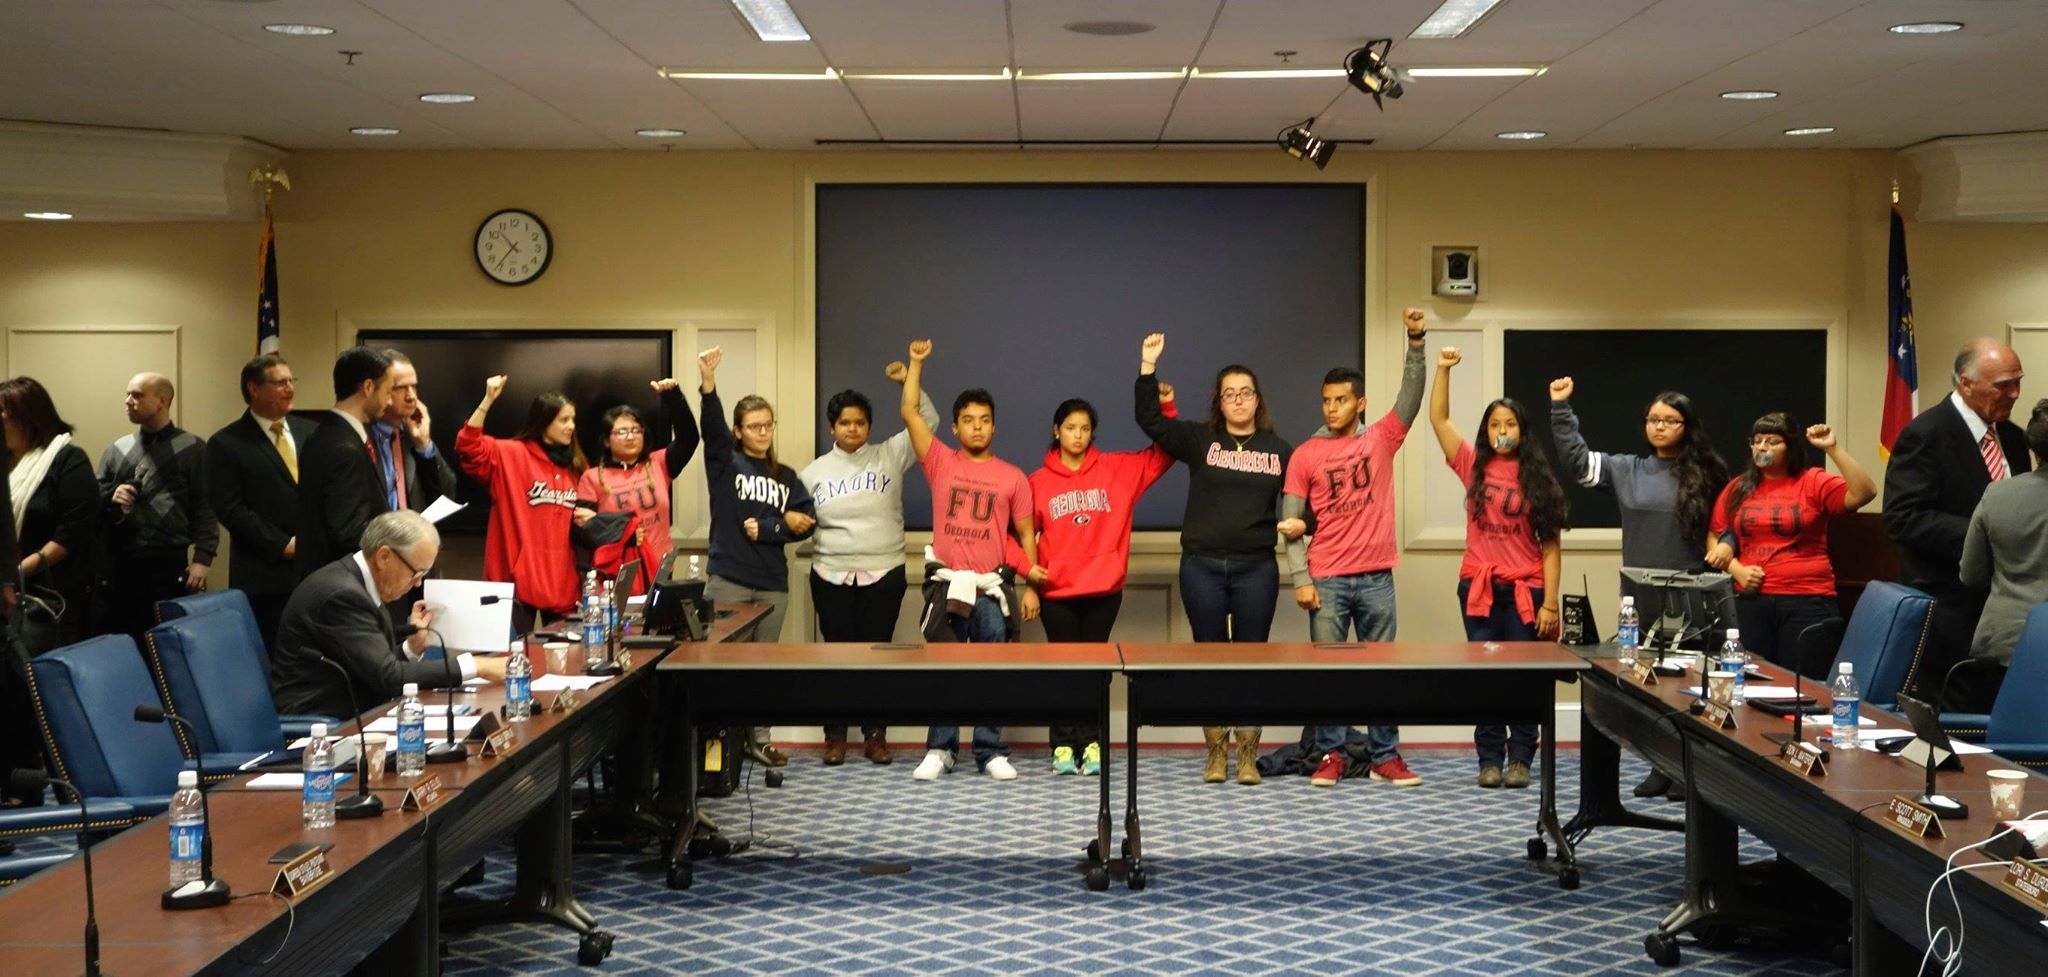 Emory Students Join in Protest at Board of Regents Meeting